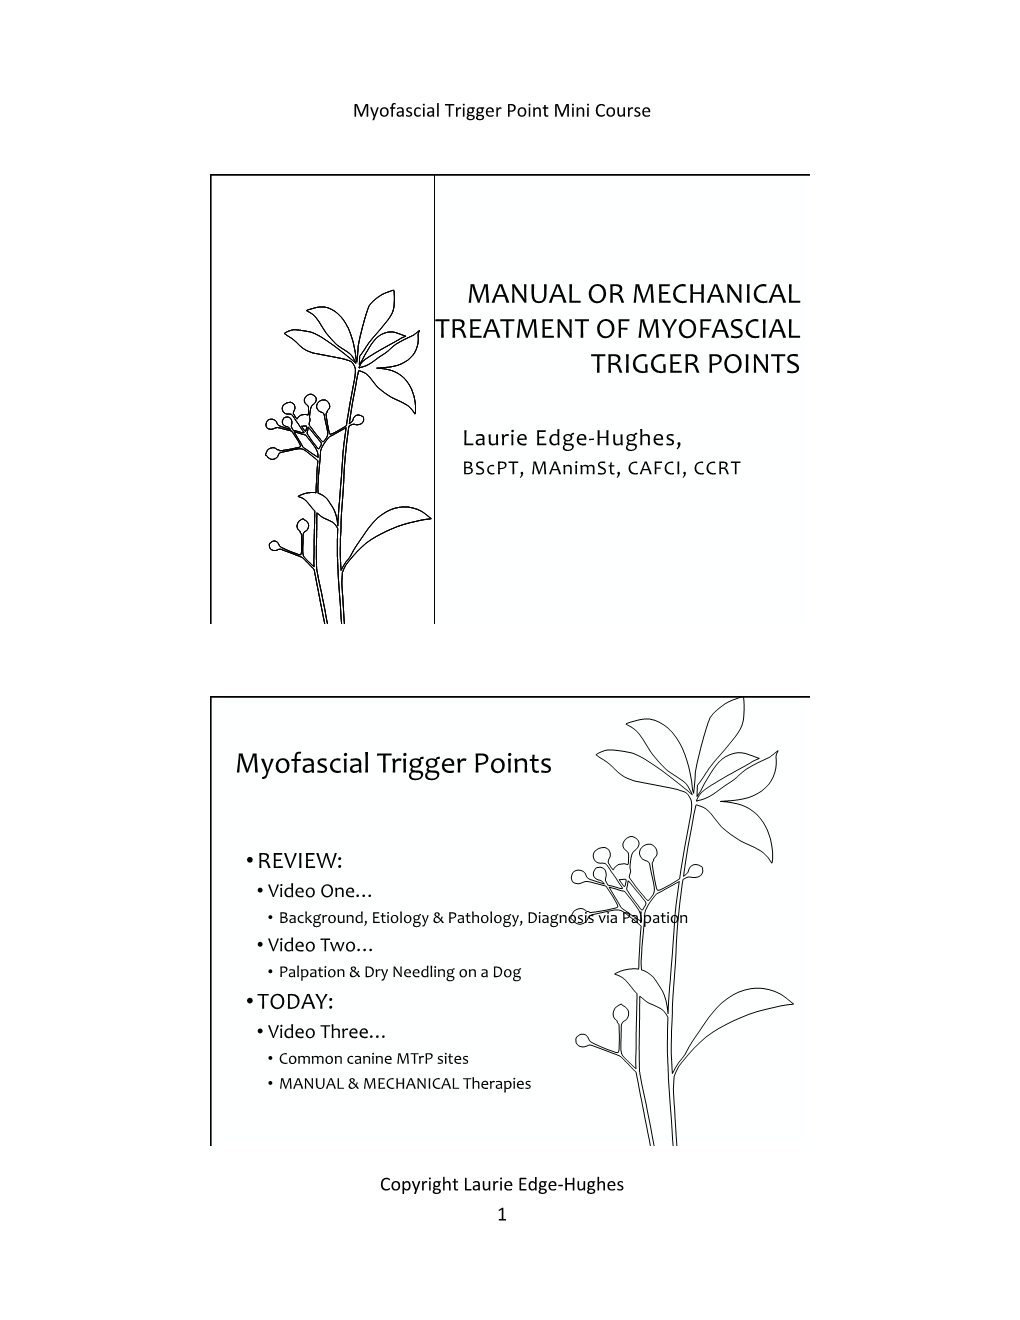 Manual Or Mechanical Treatment of Myofascial Trigger Points